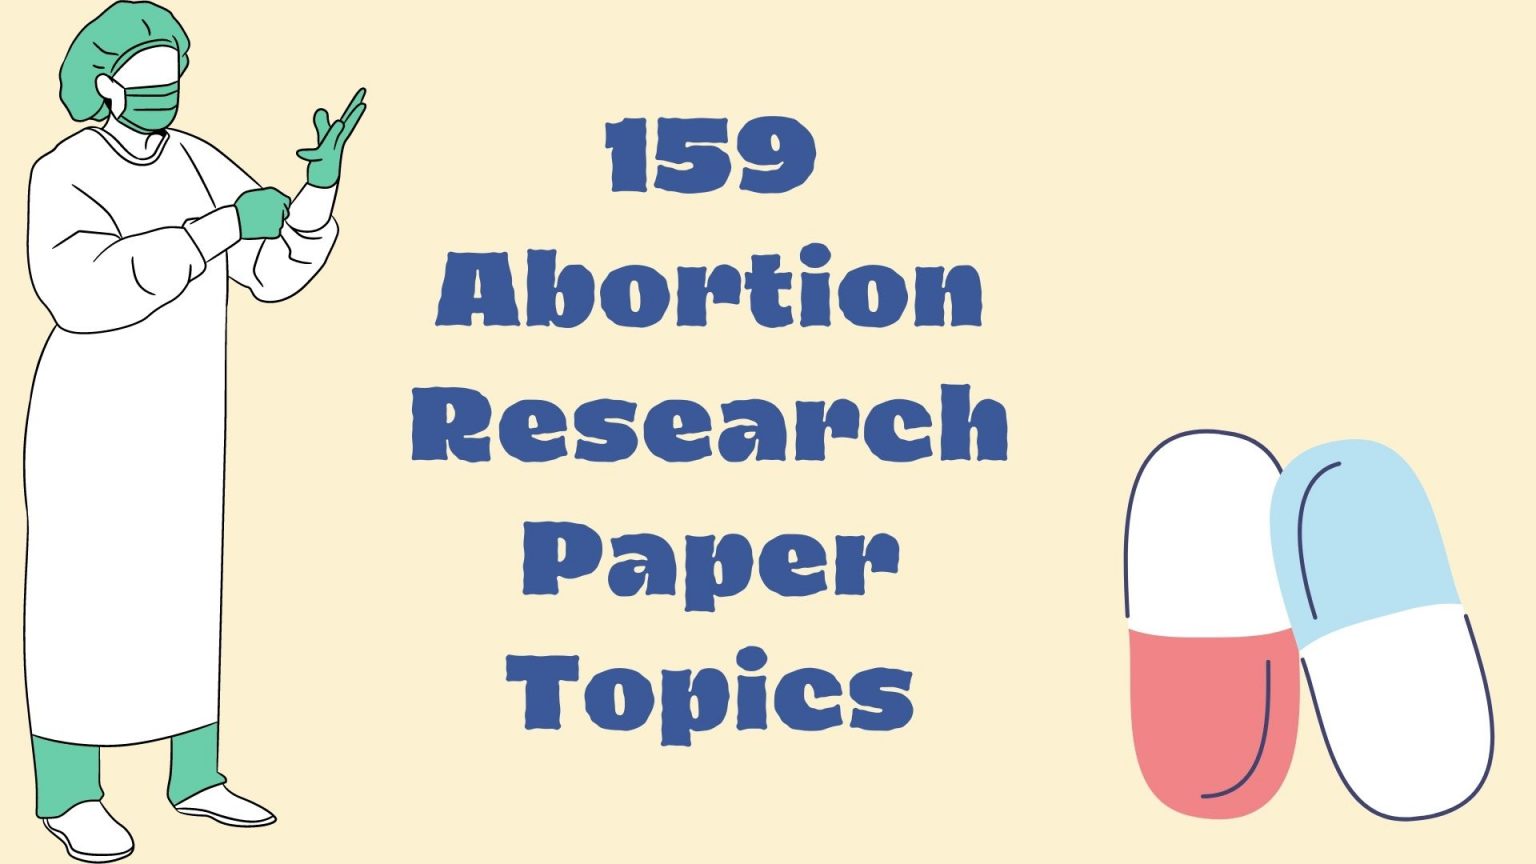 abortion controversial research paper topics